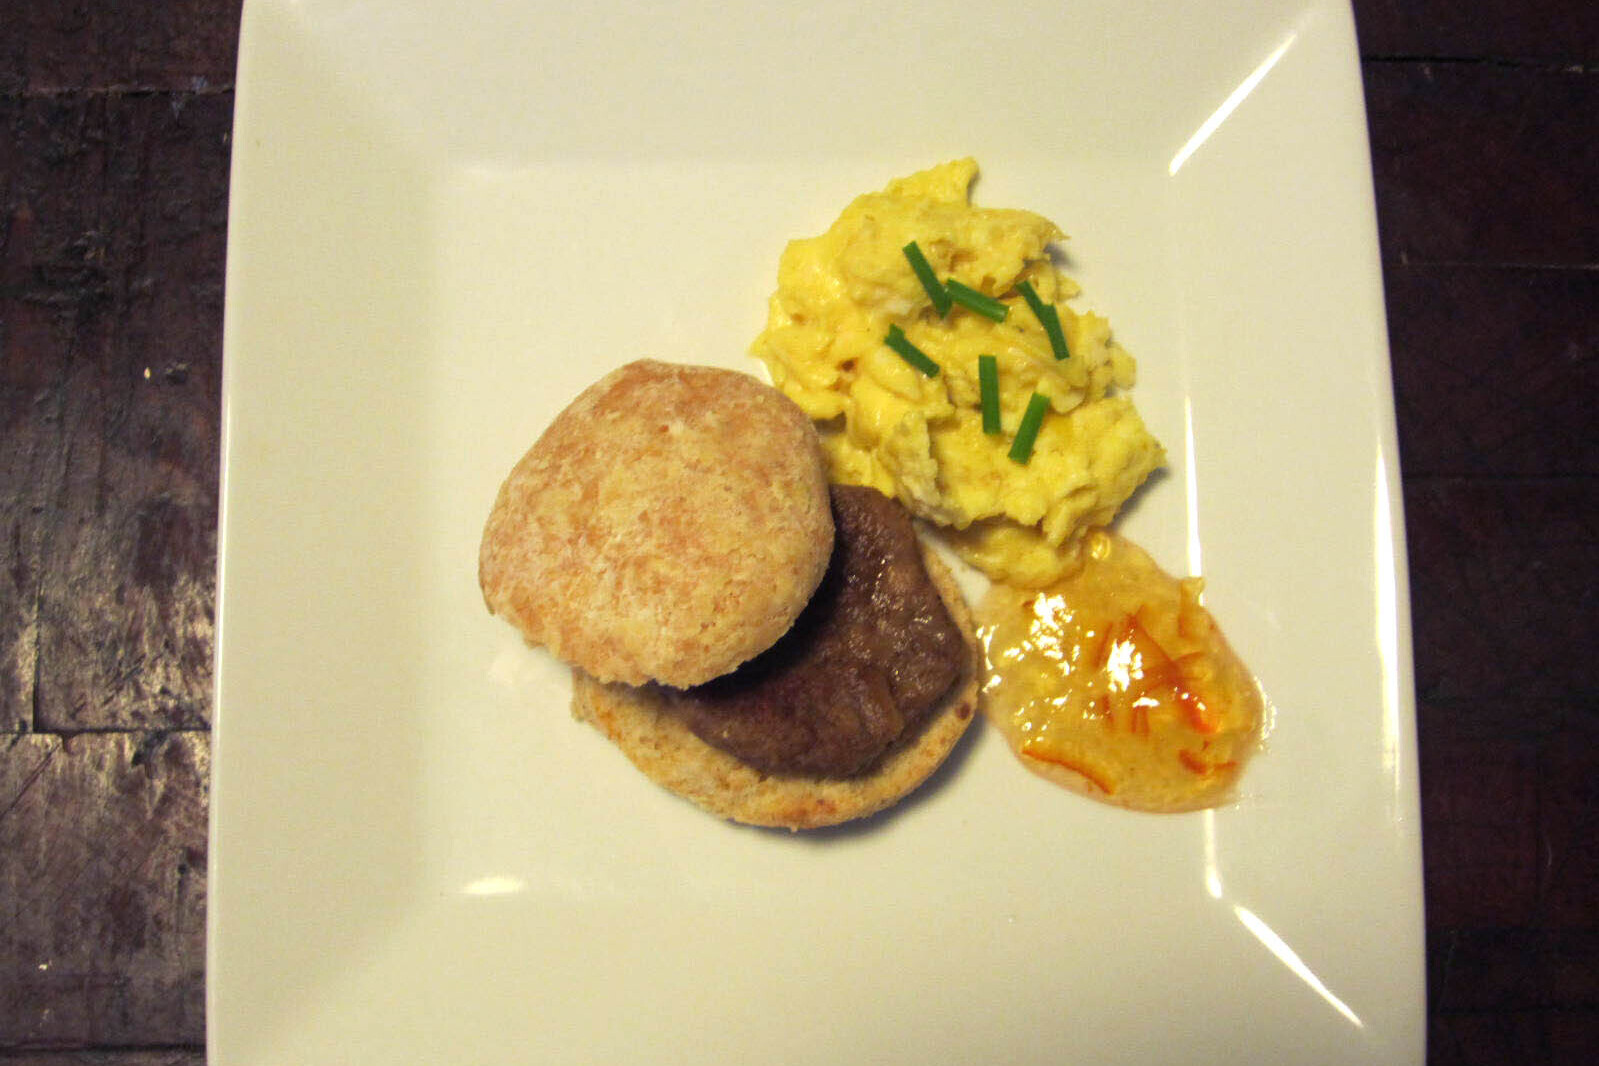 A plate with a vegetarian sausage breakfast sandwich with eggs and jam on the side